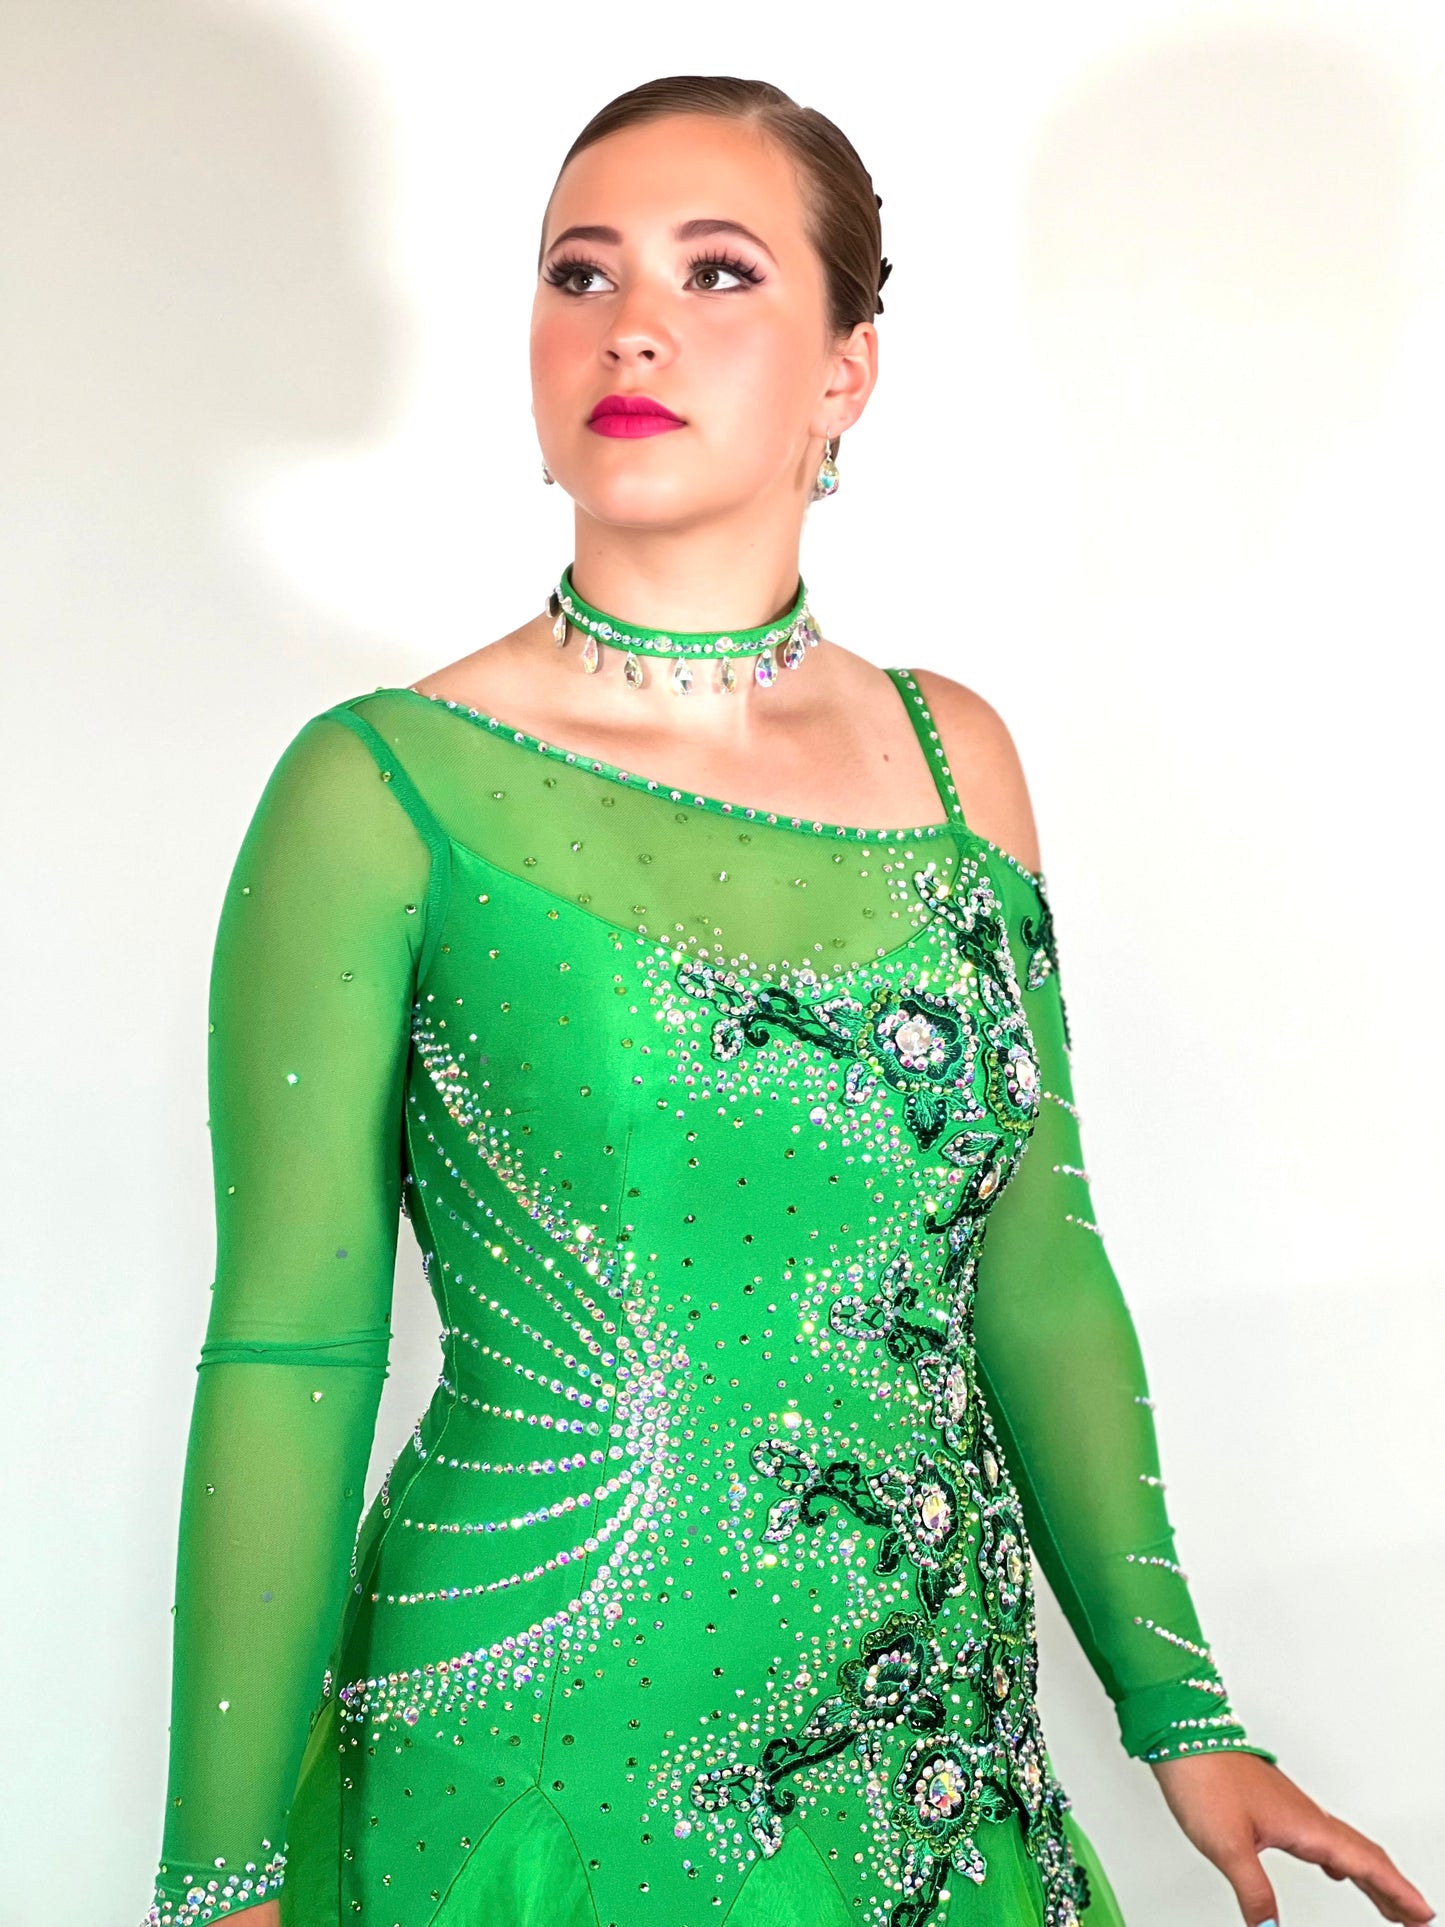 010 Apple Green one Shoulder, one cold shoulder Ballroom Dress. Appliqué stoned in AB & Jade to one side of the bodice.